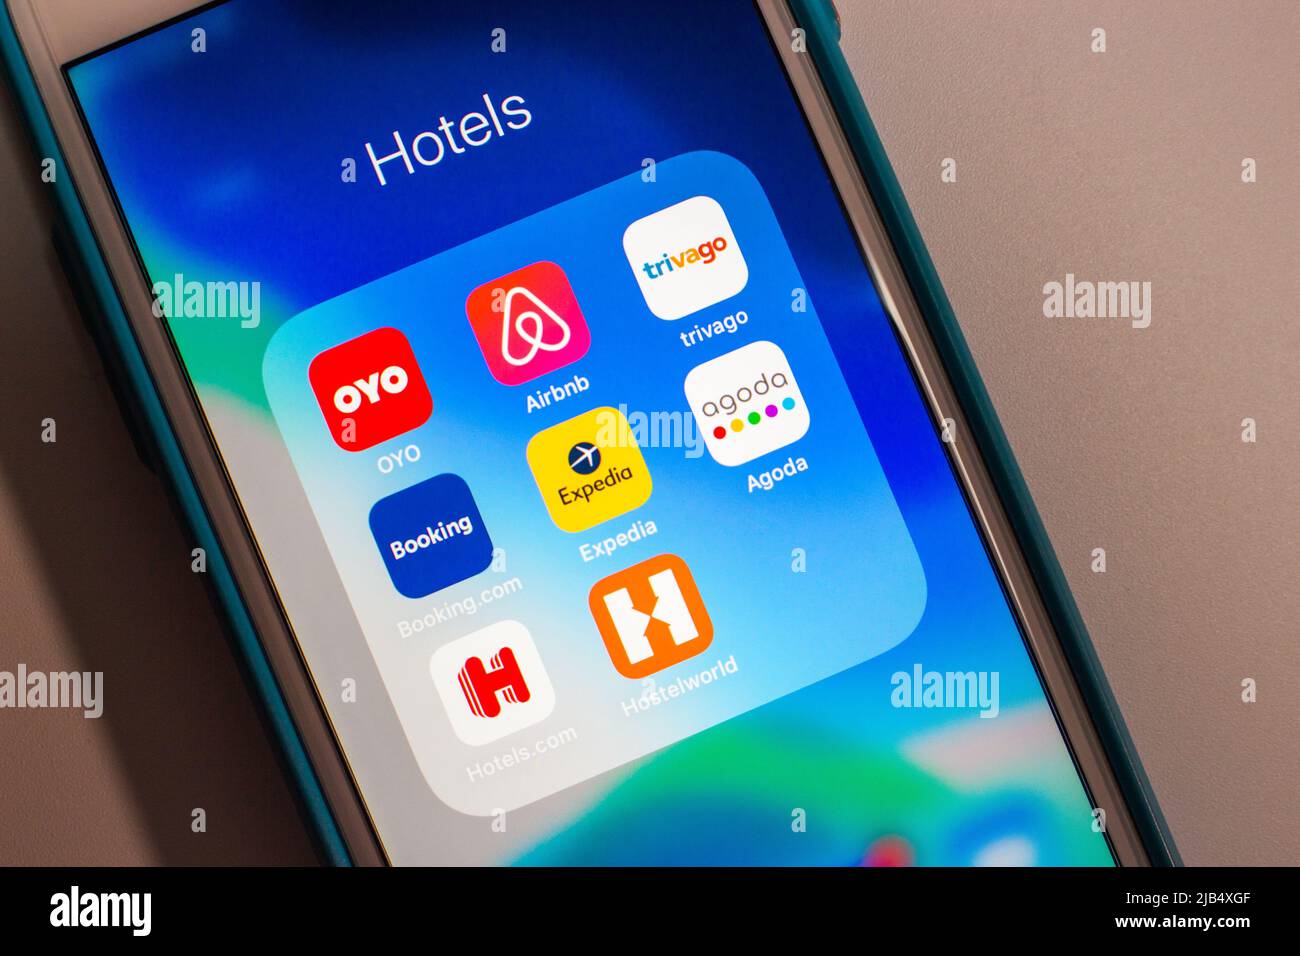 Hotel chain, travel agencies & booking companies on iPhone (OYO, Airbnb Trivago, Booking.com, Expedia, Agoda, Hotels.com & Hostelworld). Stock Photo